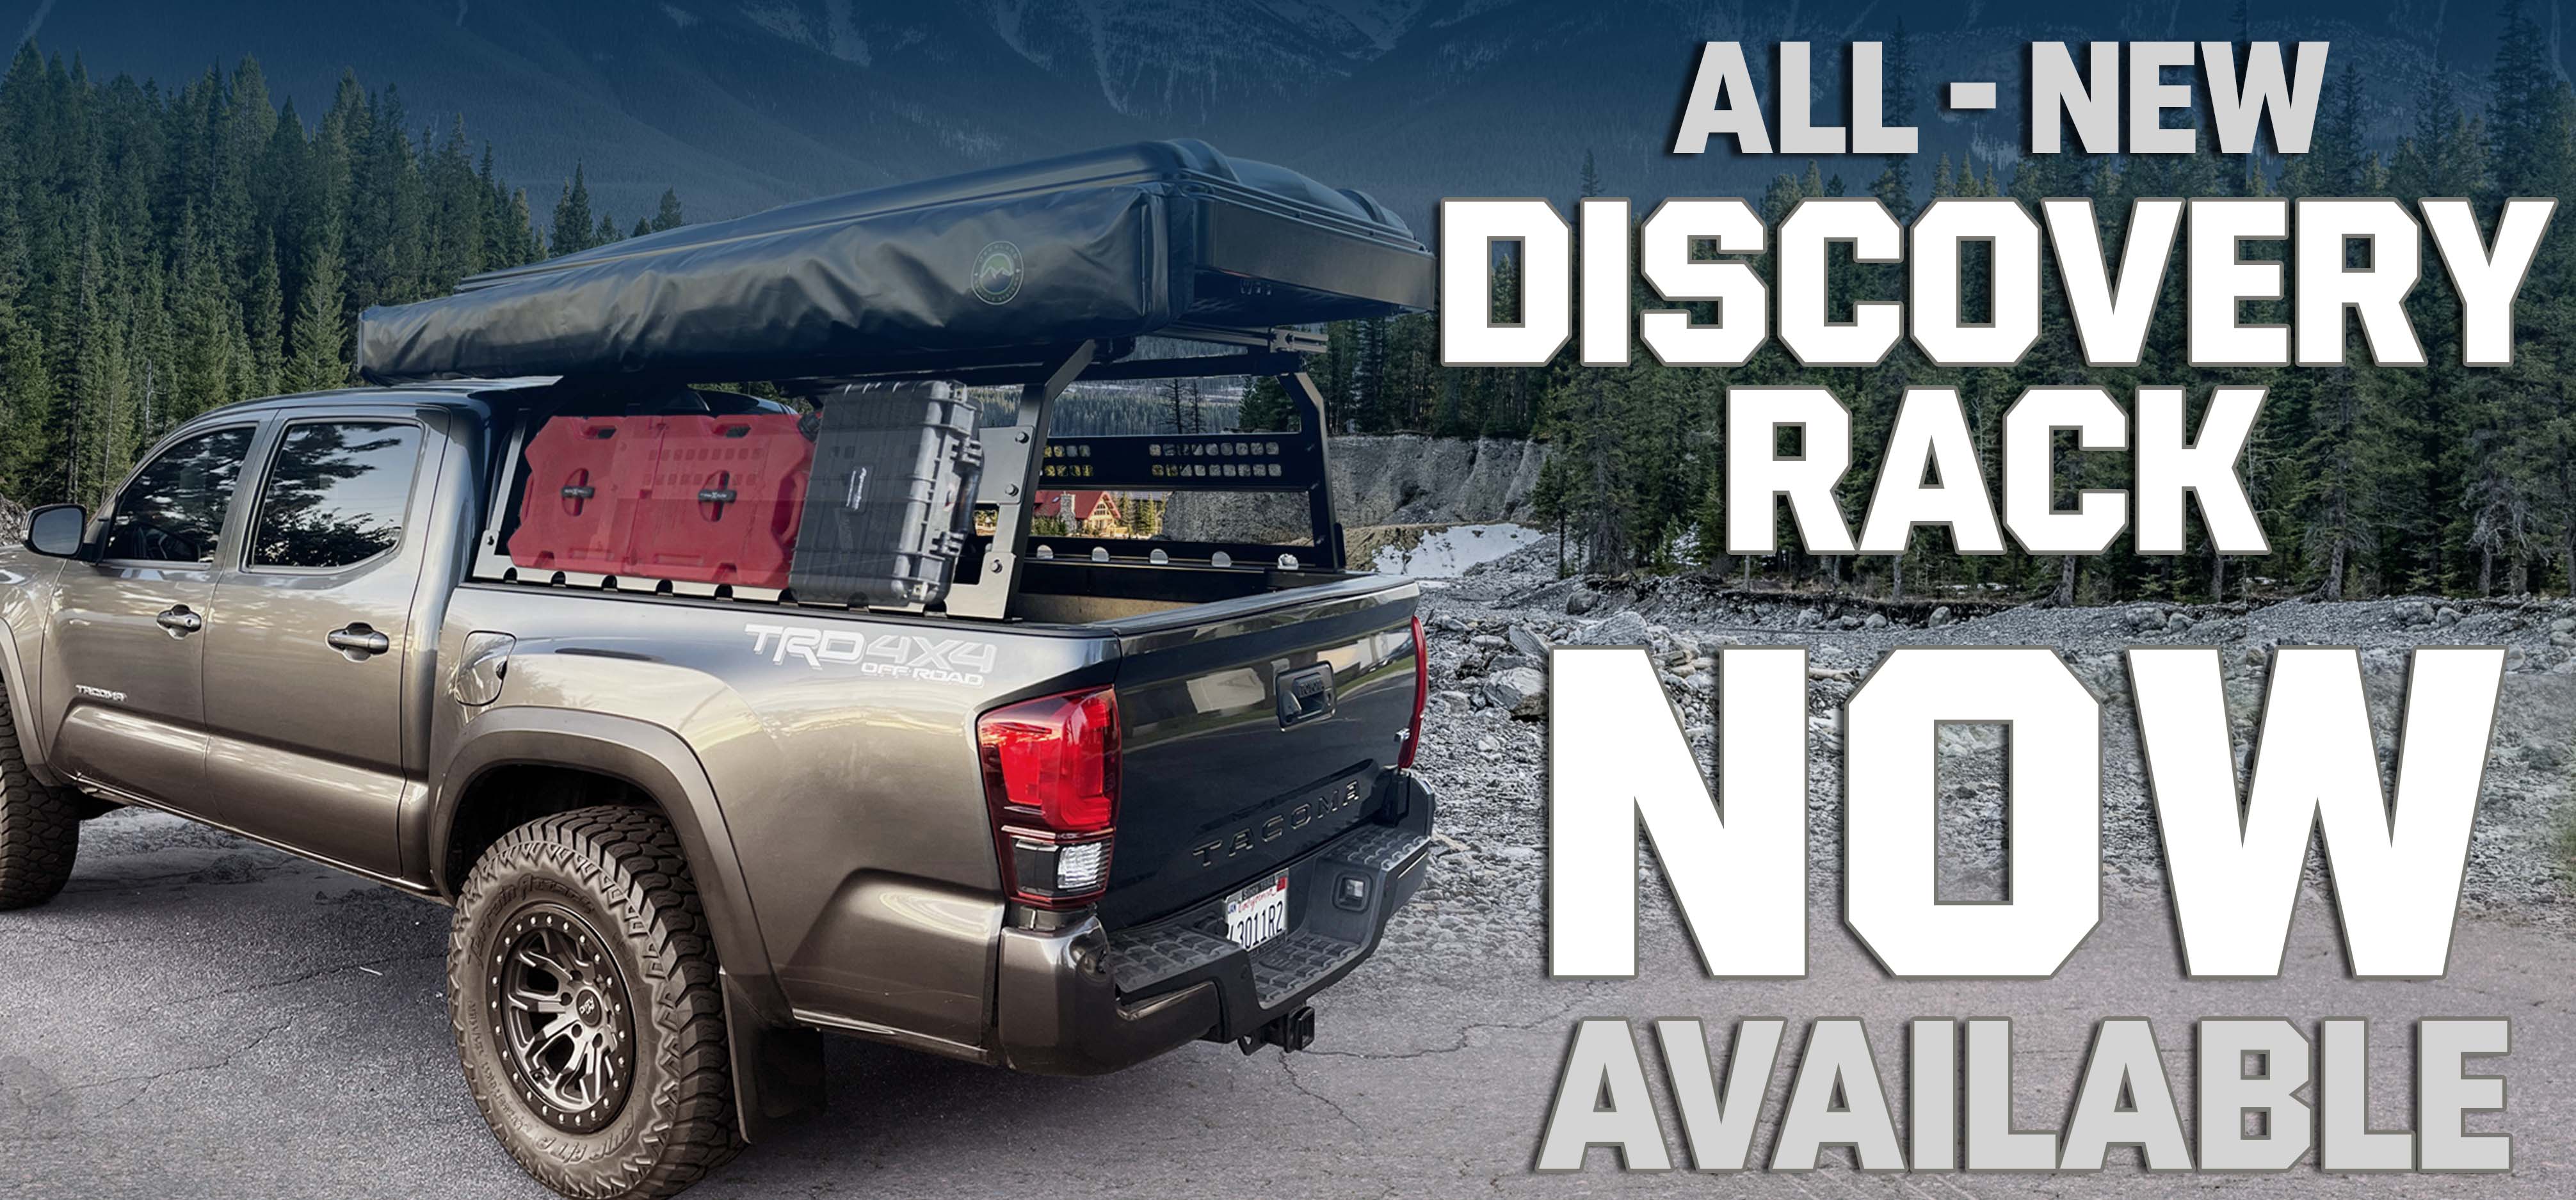 All - New Discovery Rack Now Available